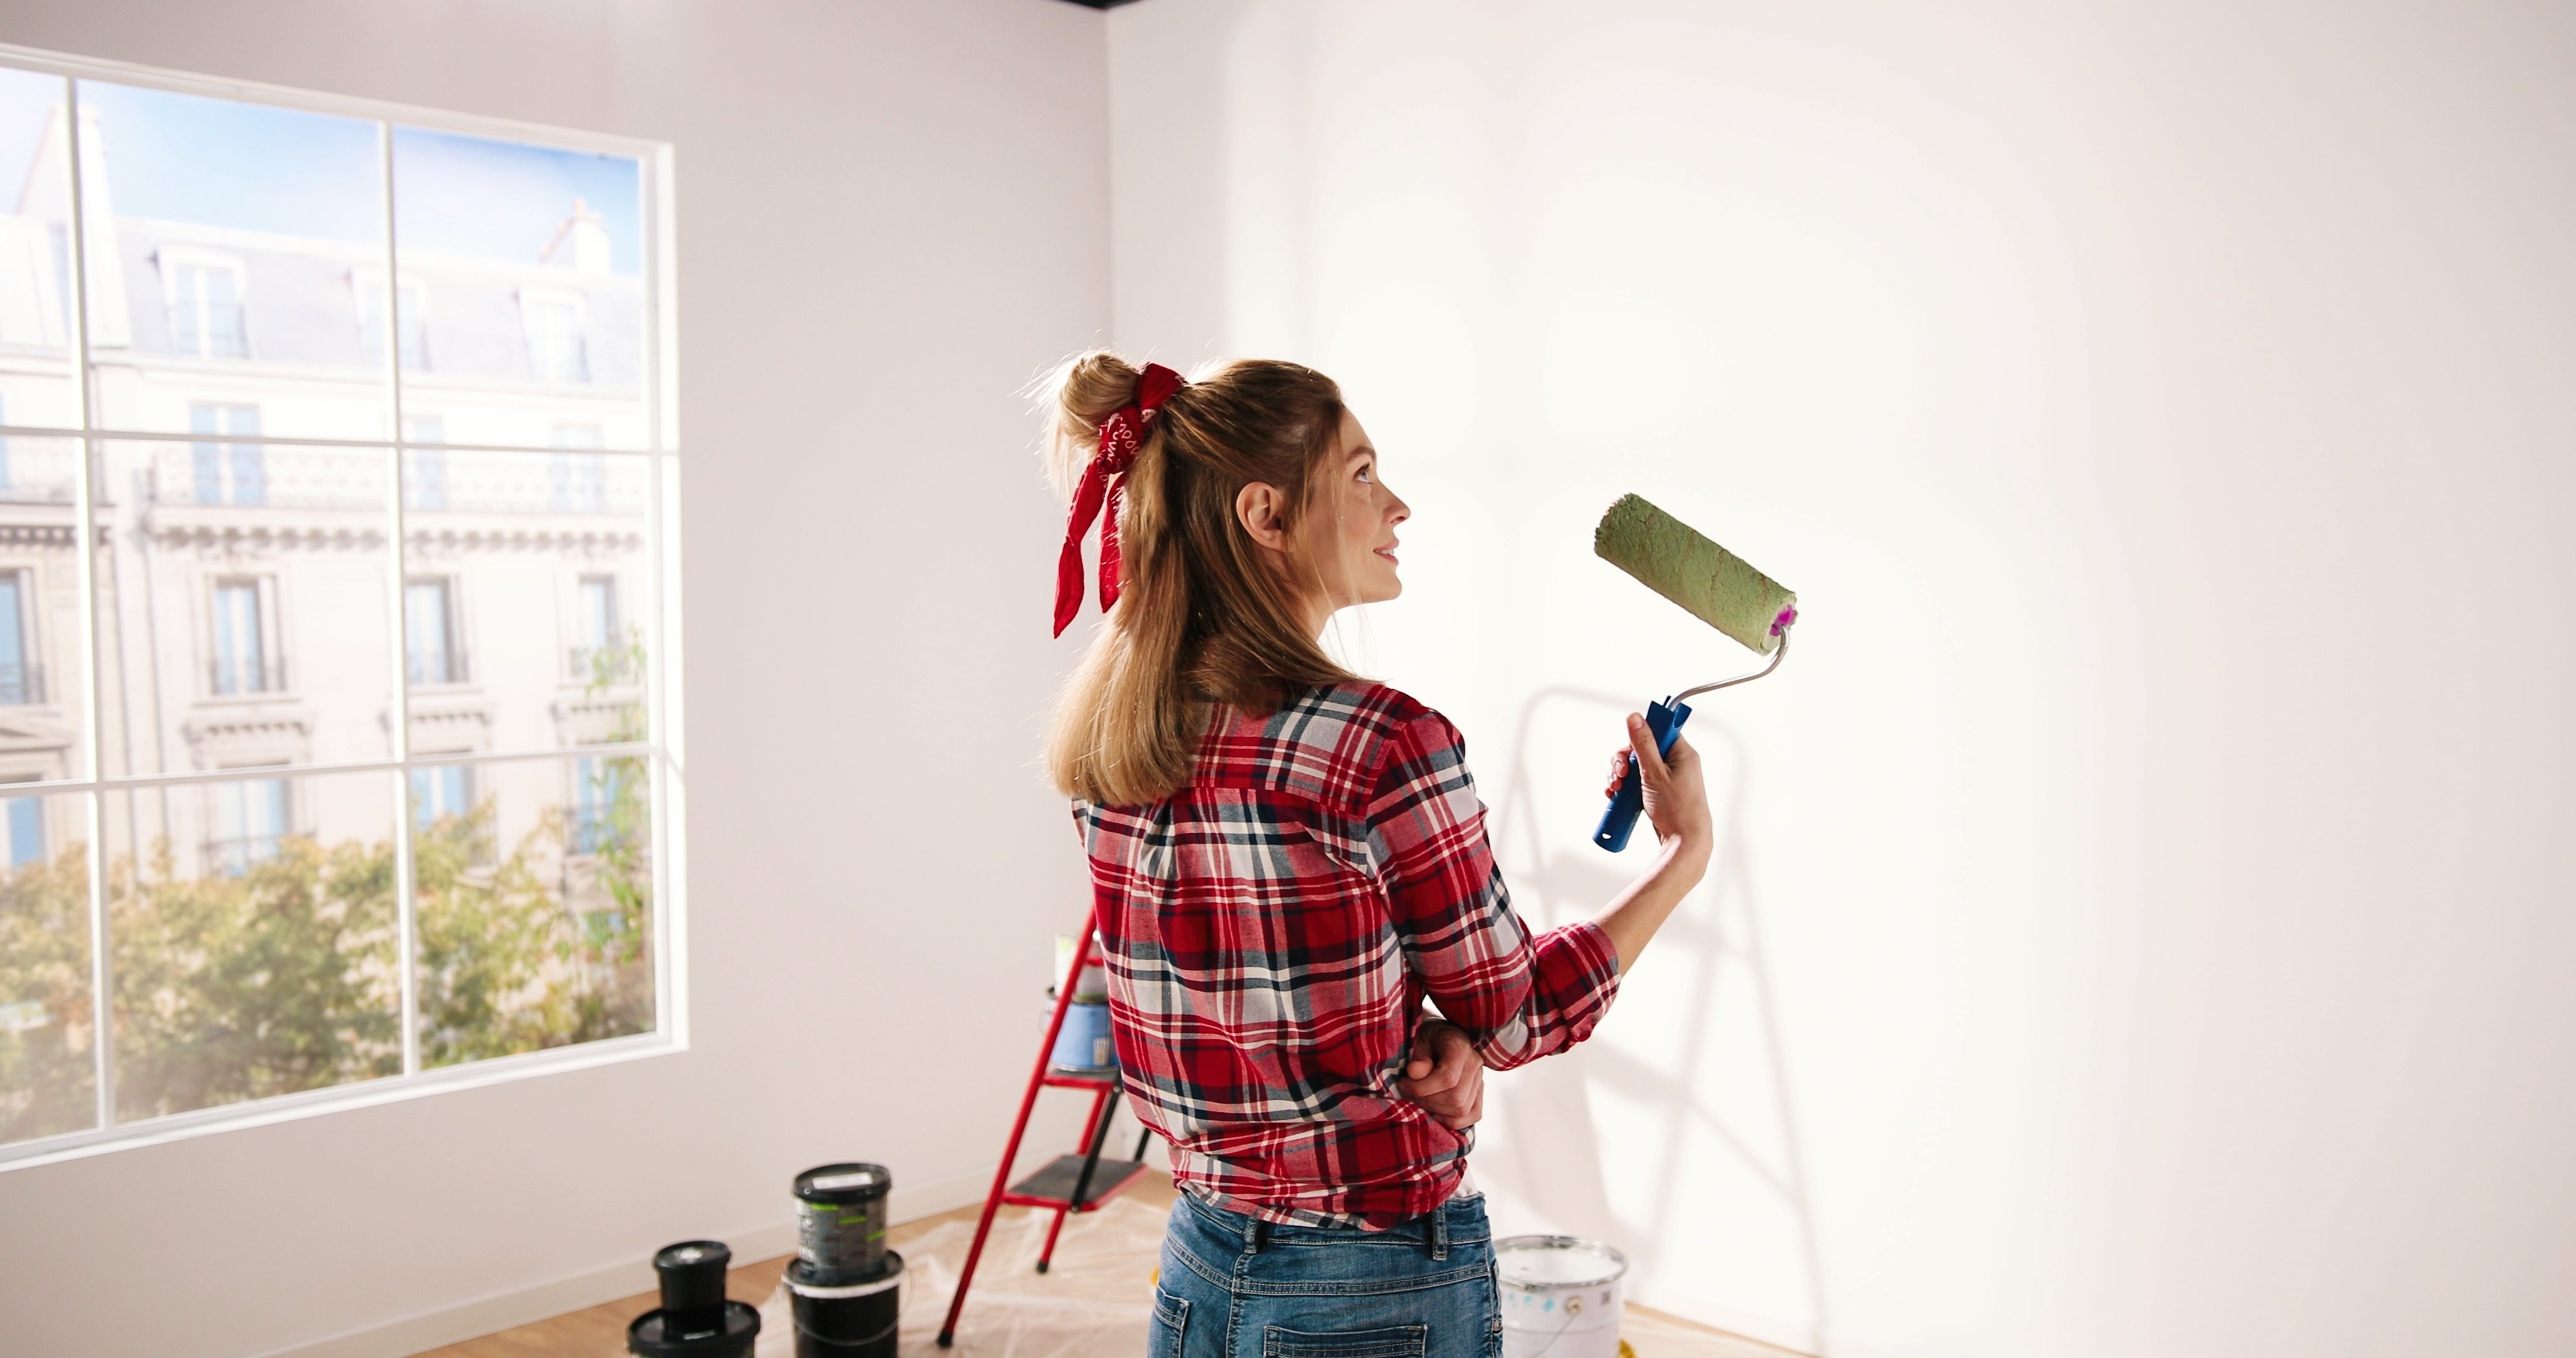 A woman painting wall using roller brush